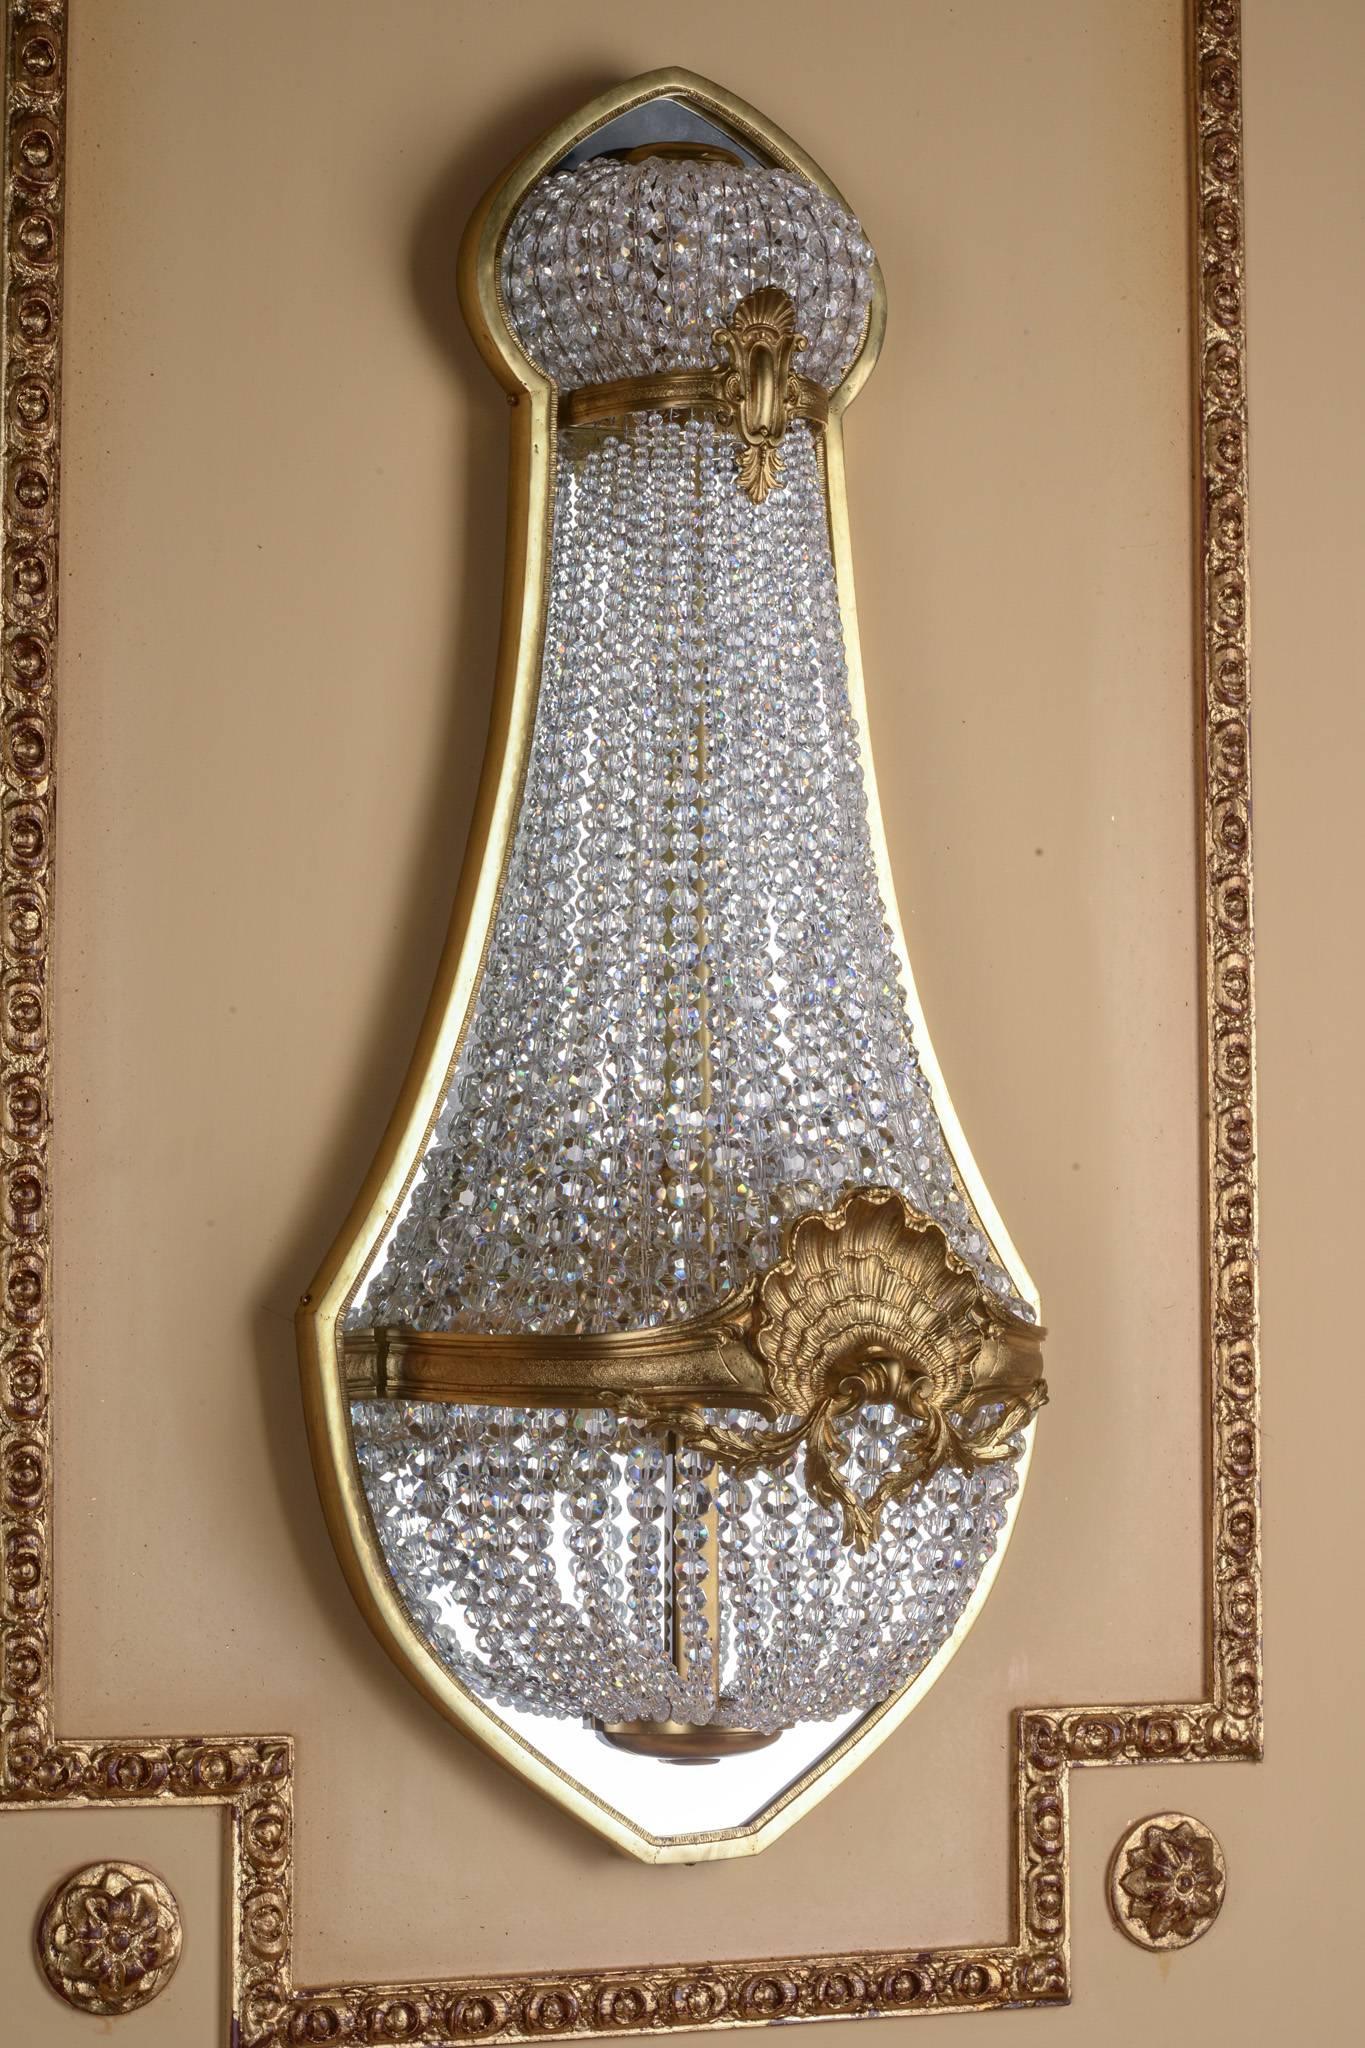 A classicist wall sconce with finely chiselled bronze. Basket-shaped body made of hand-cut French ball prisms in the course of broad, ornamental-reliefed ring connected centrally placed shell. The finely ground crystals break and reflect the light